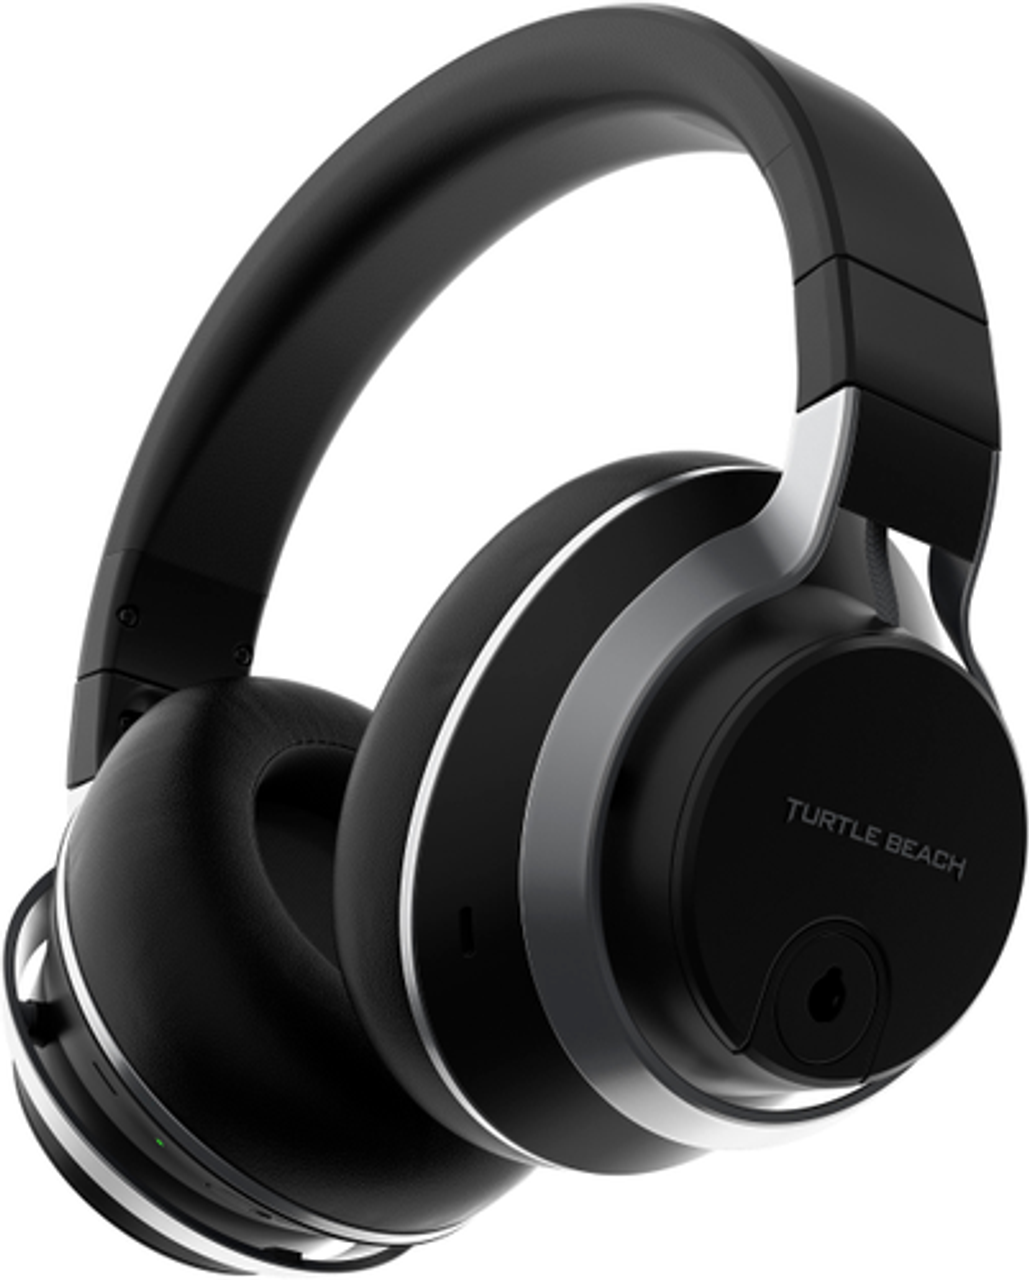 Turtle Beach Stealth Pro Multiplatform Wireless Noise-Cancelling Gaming Headset for Xbox - Black